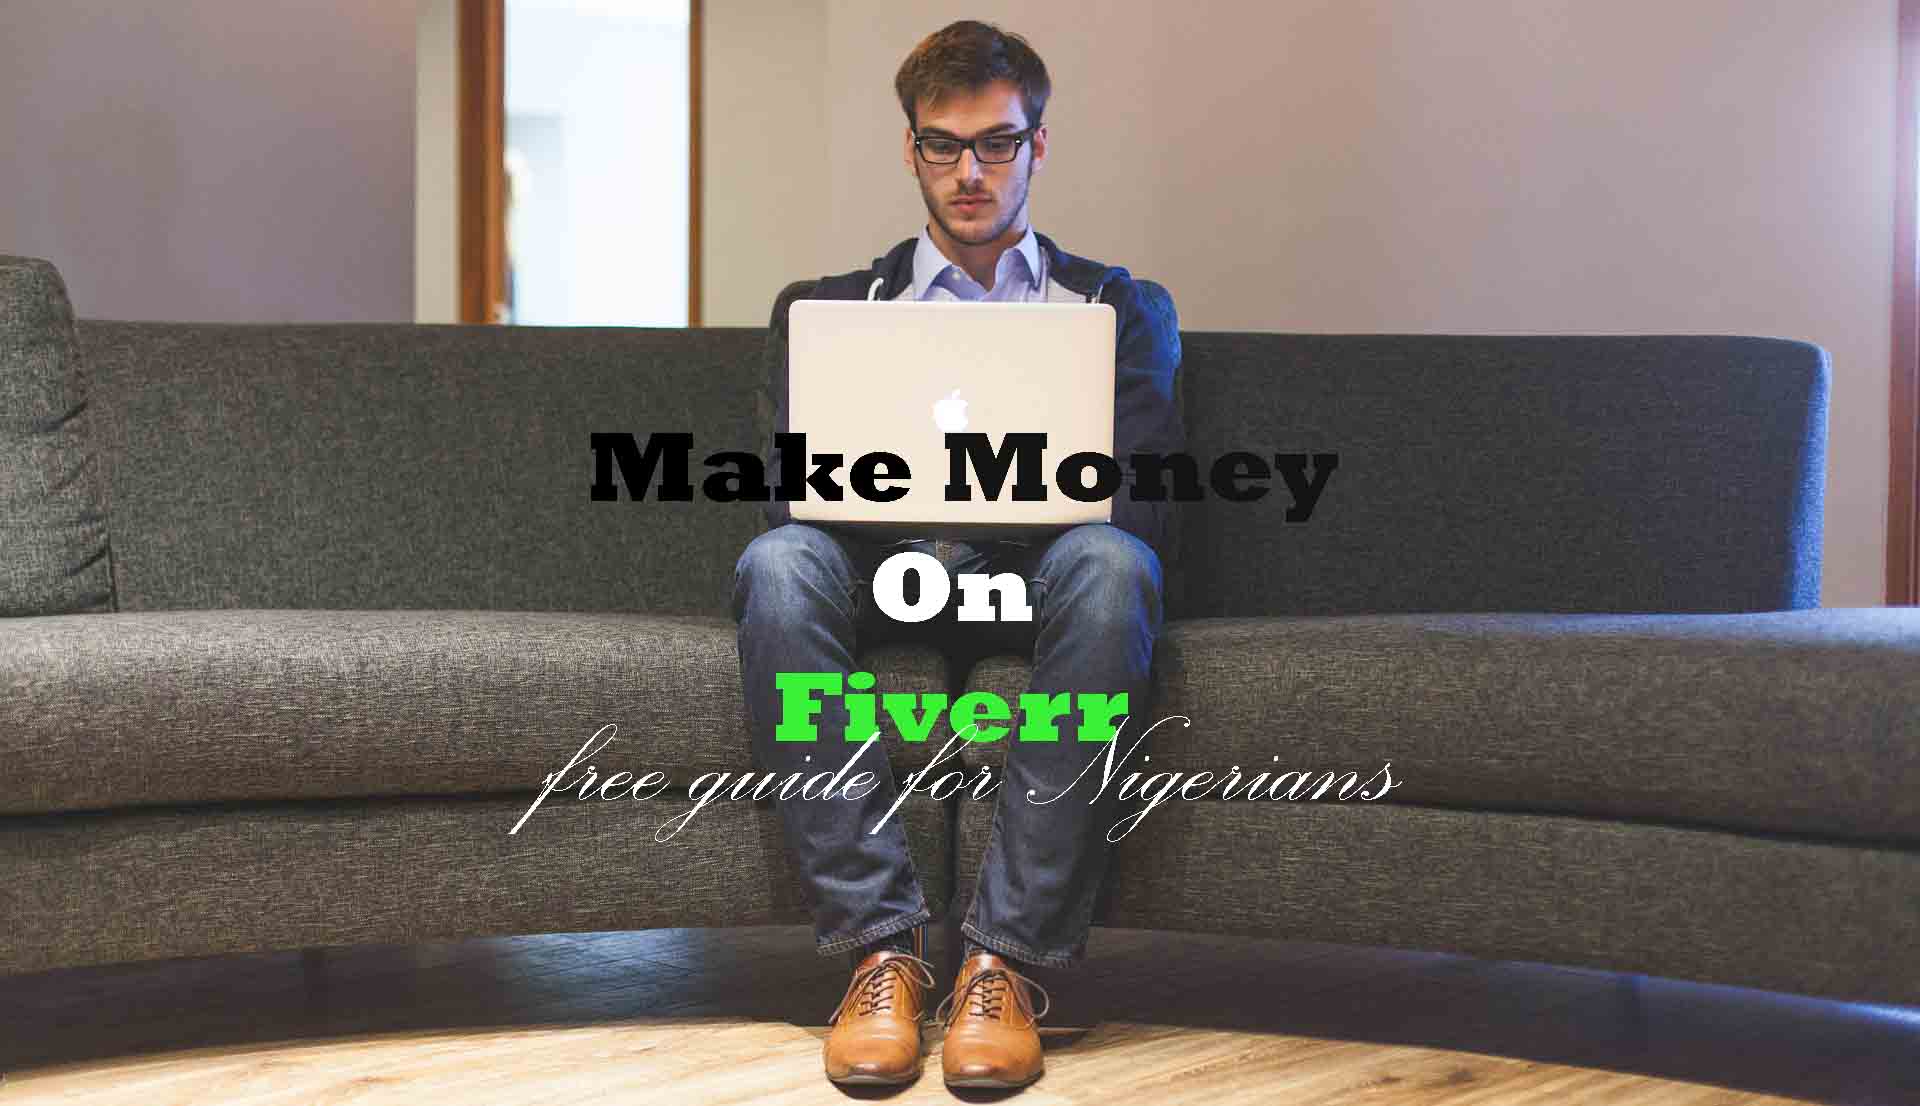 Make money on Fiverr: Free guide for Nigerians